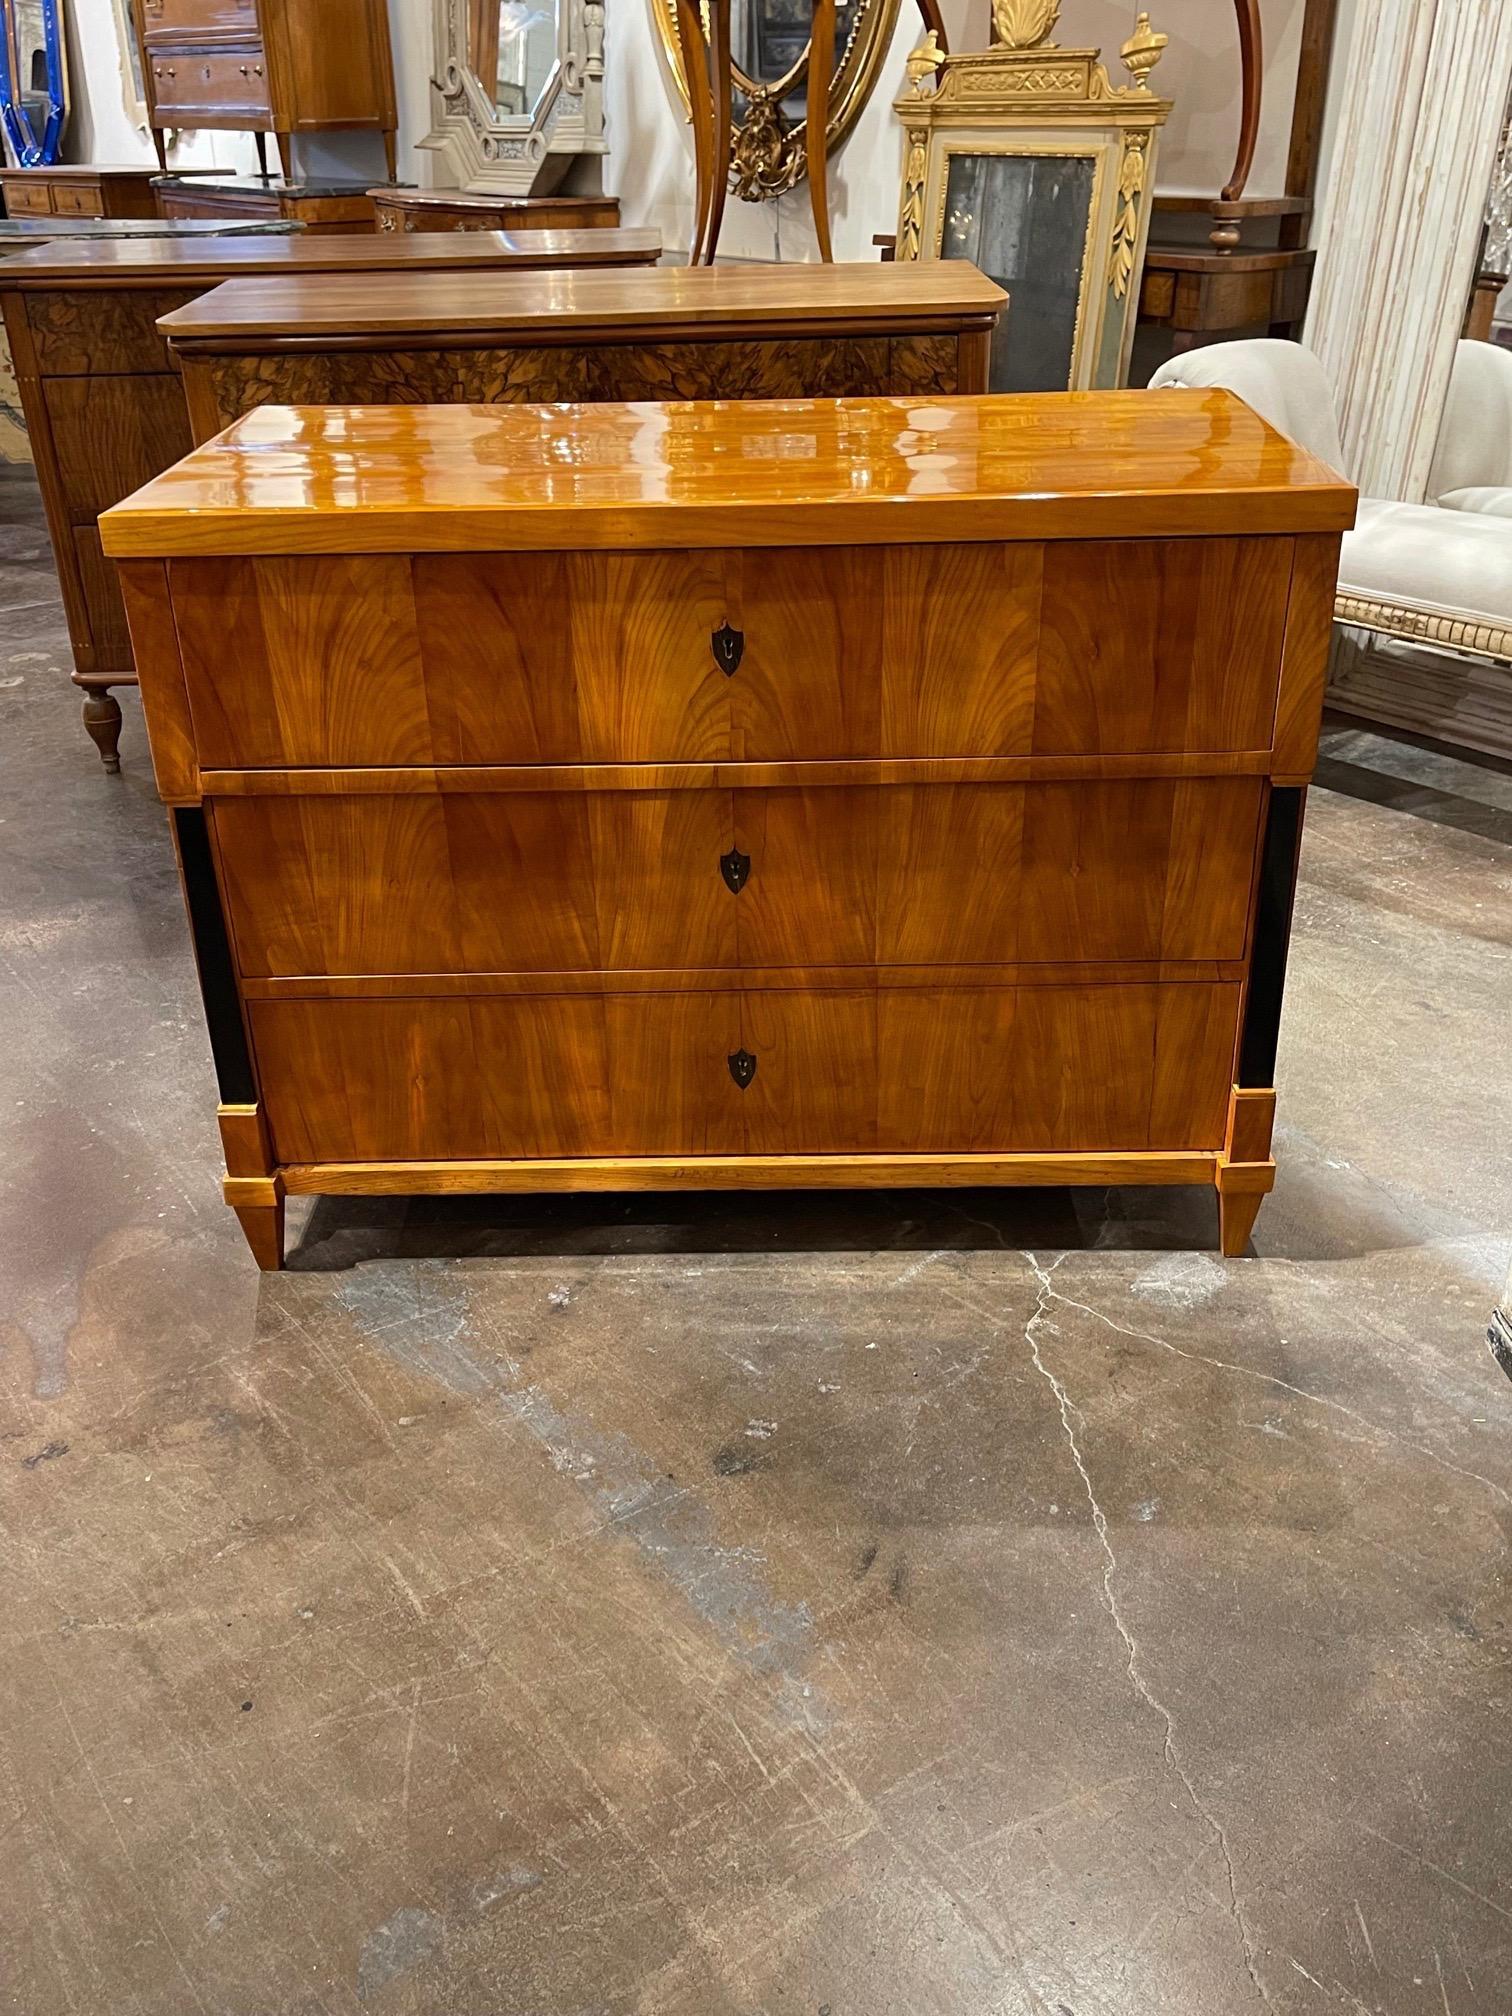 Very fine period Austrian Biedermeier walnut commode. This piece has an exceptional finish and beautiful clean lines. Also ebonized columns and 3 drawers for storage. Stunning!!